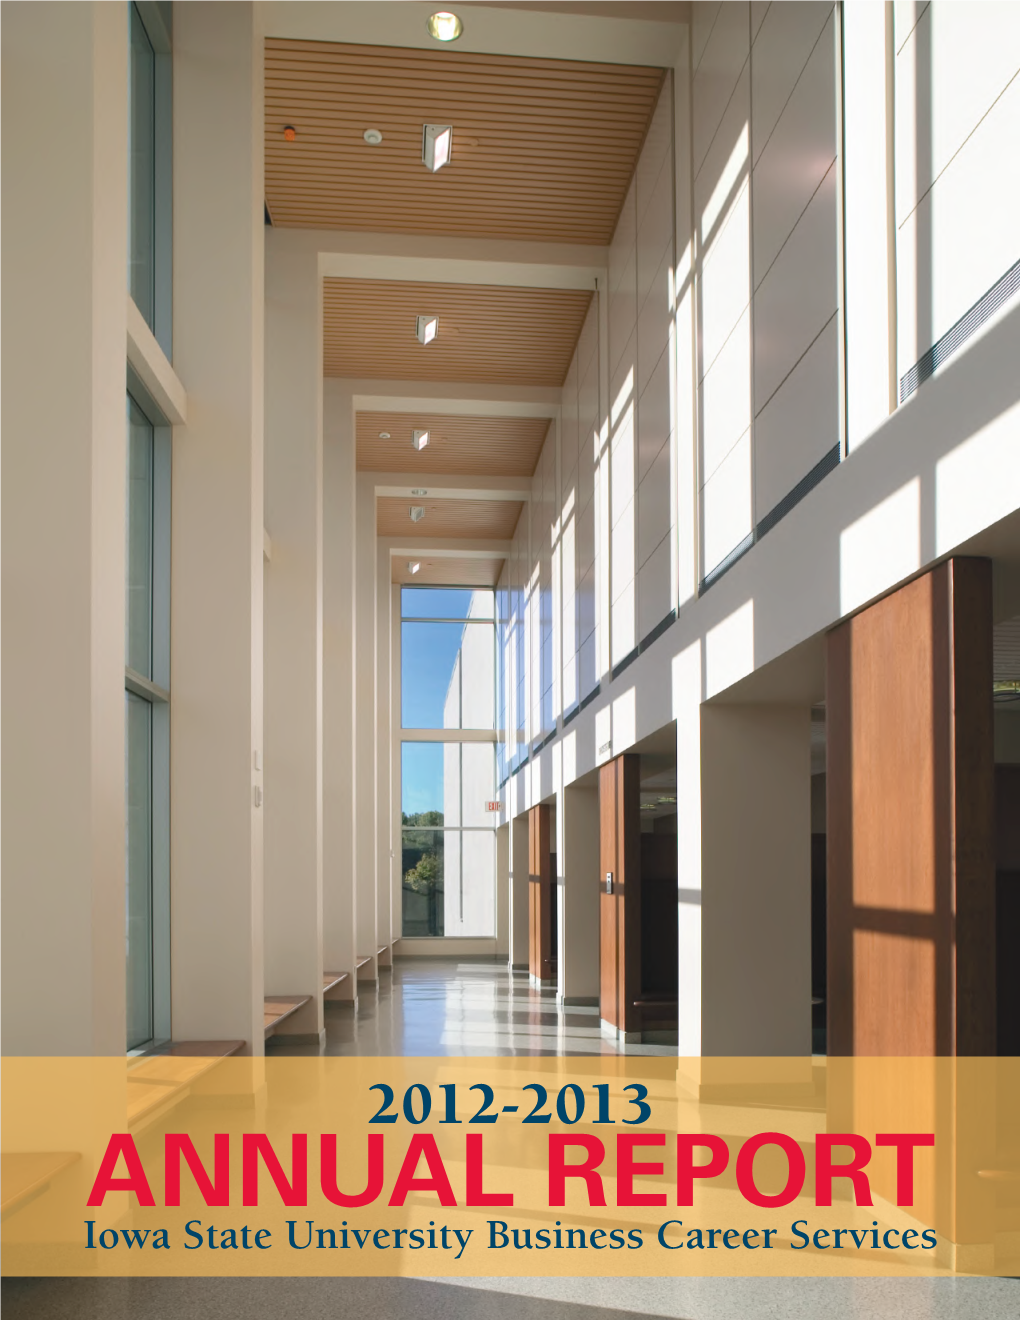 ANNUAL REPORT Iowa State University Business Career Services Director’S Summary